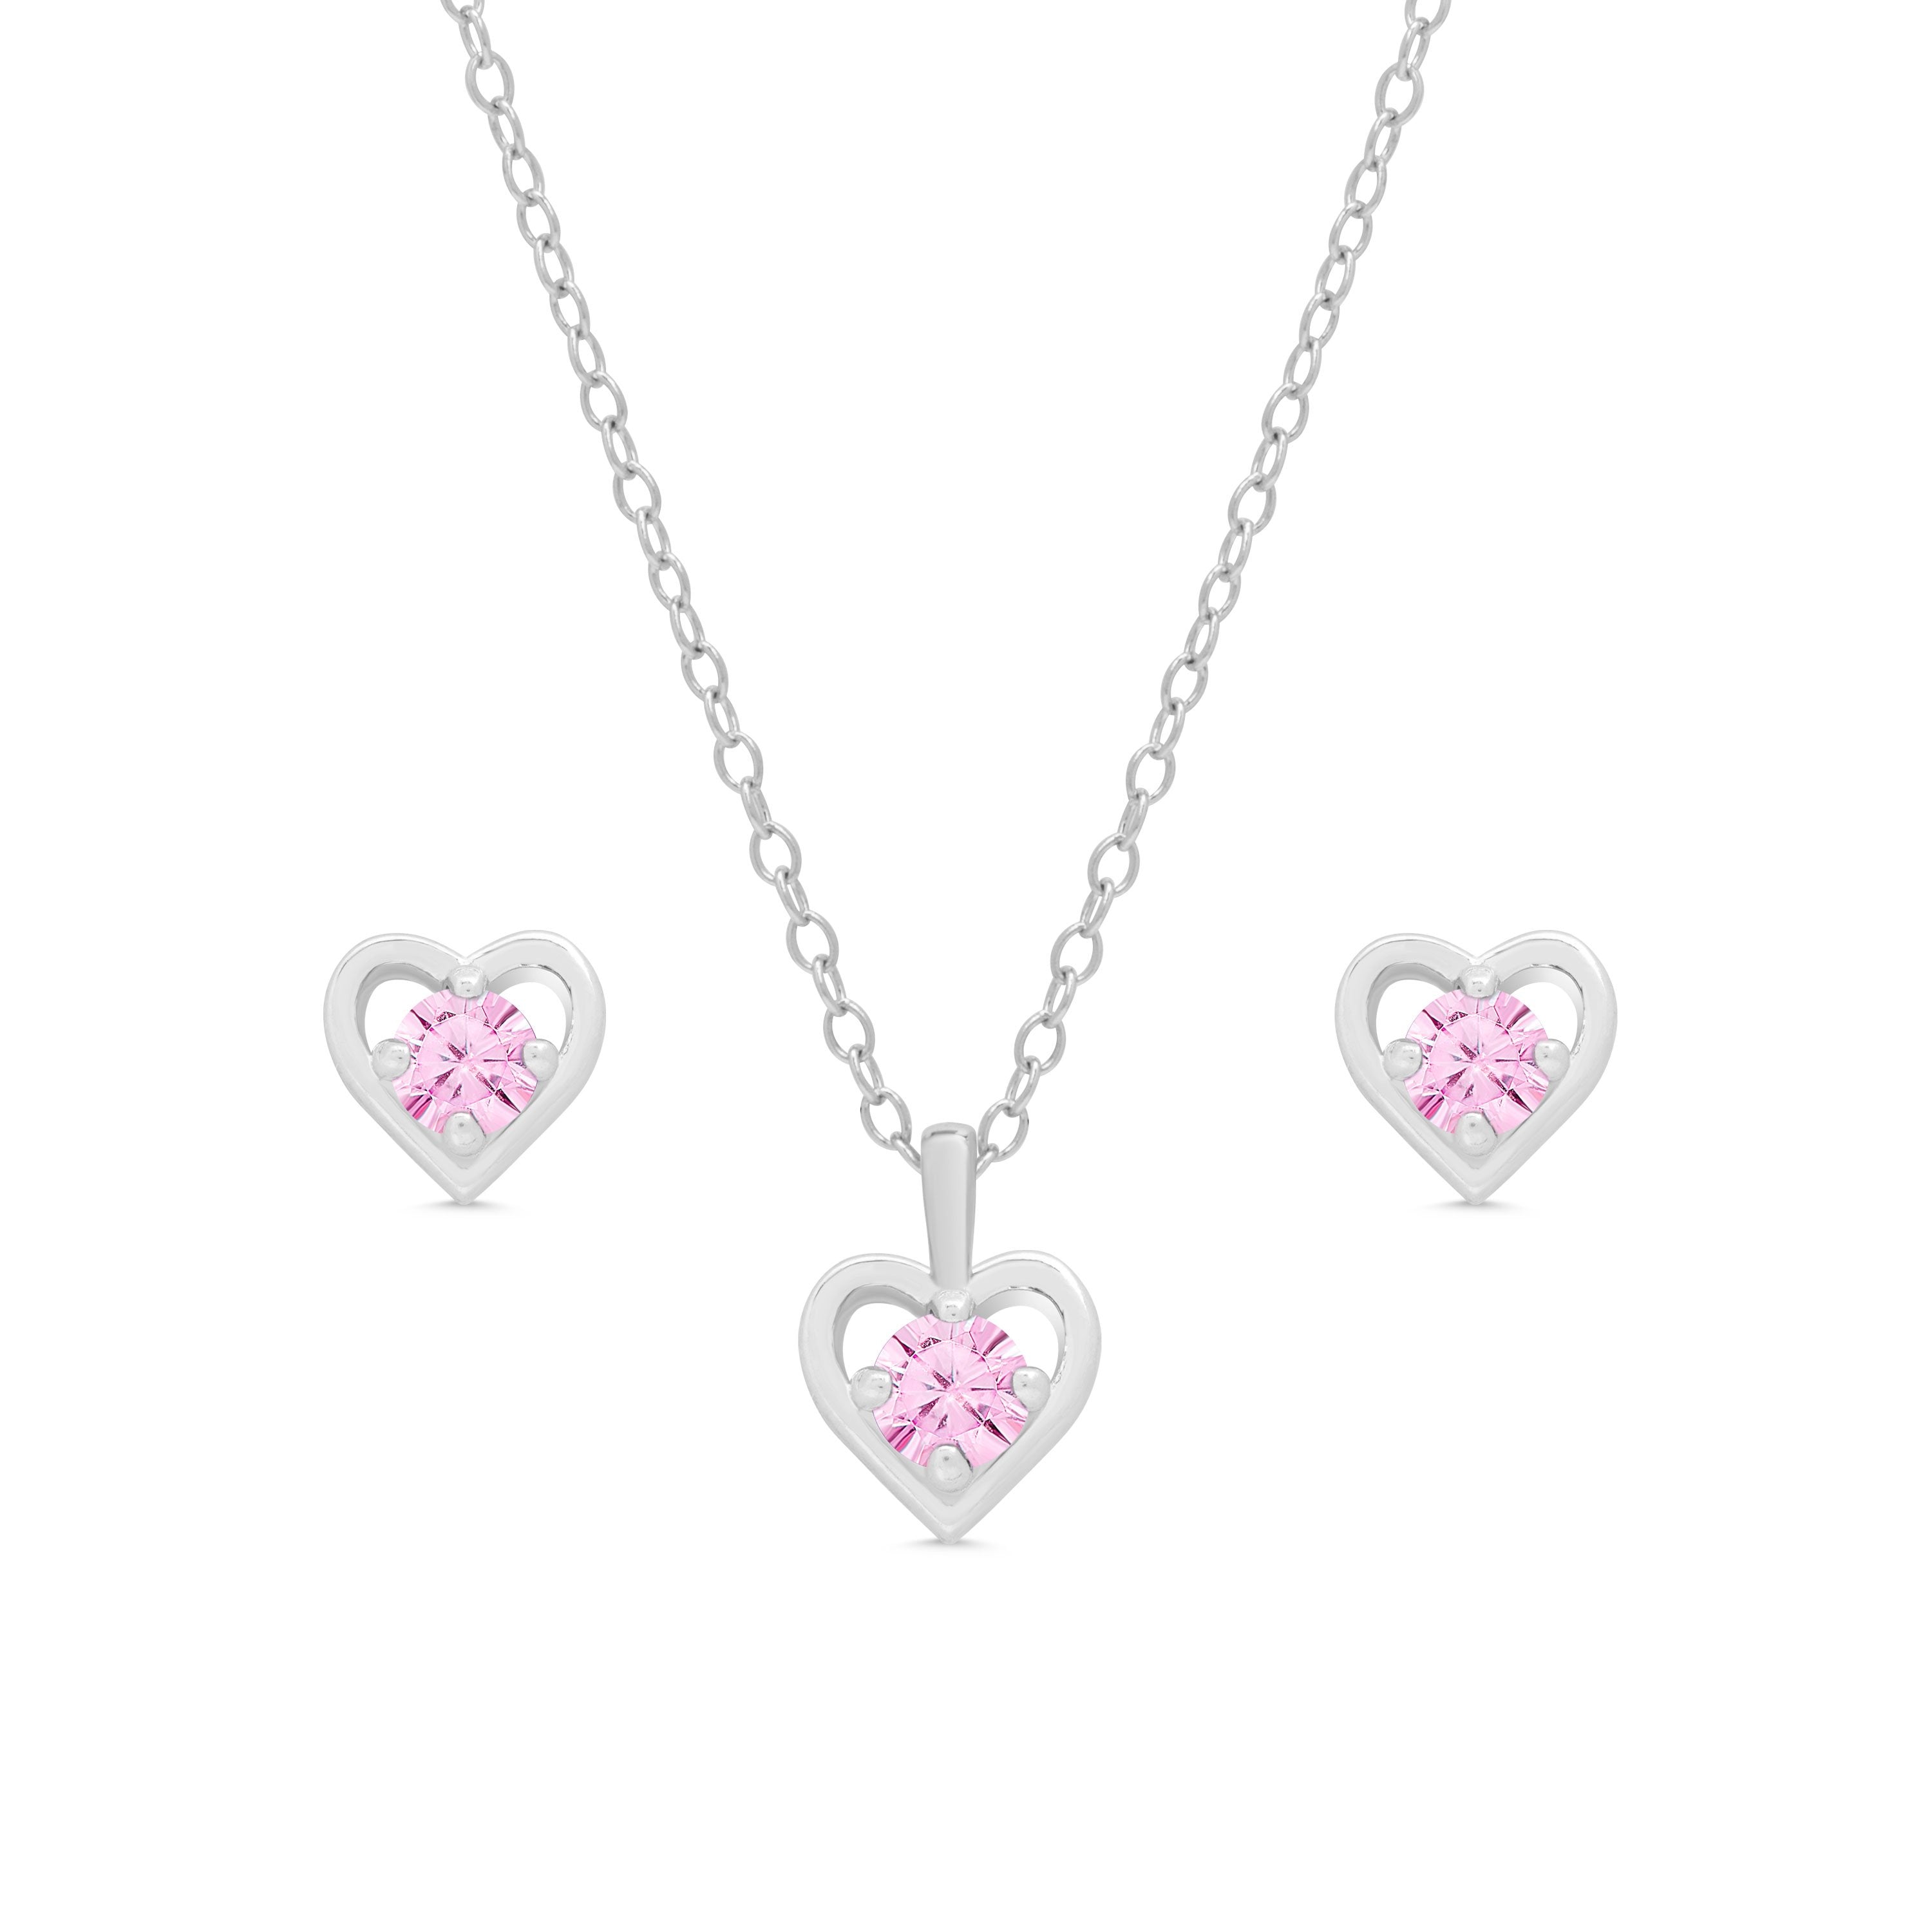 Greenwich 4 Pink Tourmaline & Diamond Necklace and Earrings Set in 14k